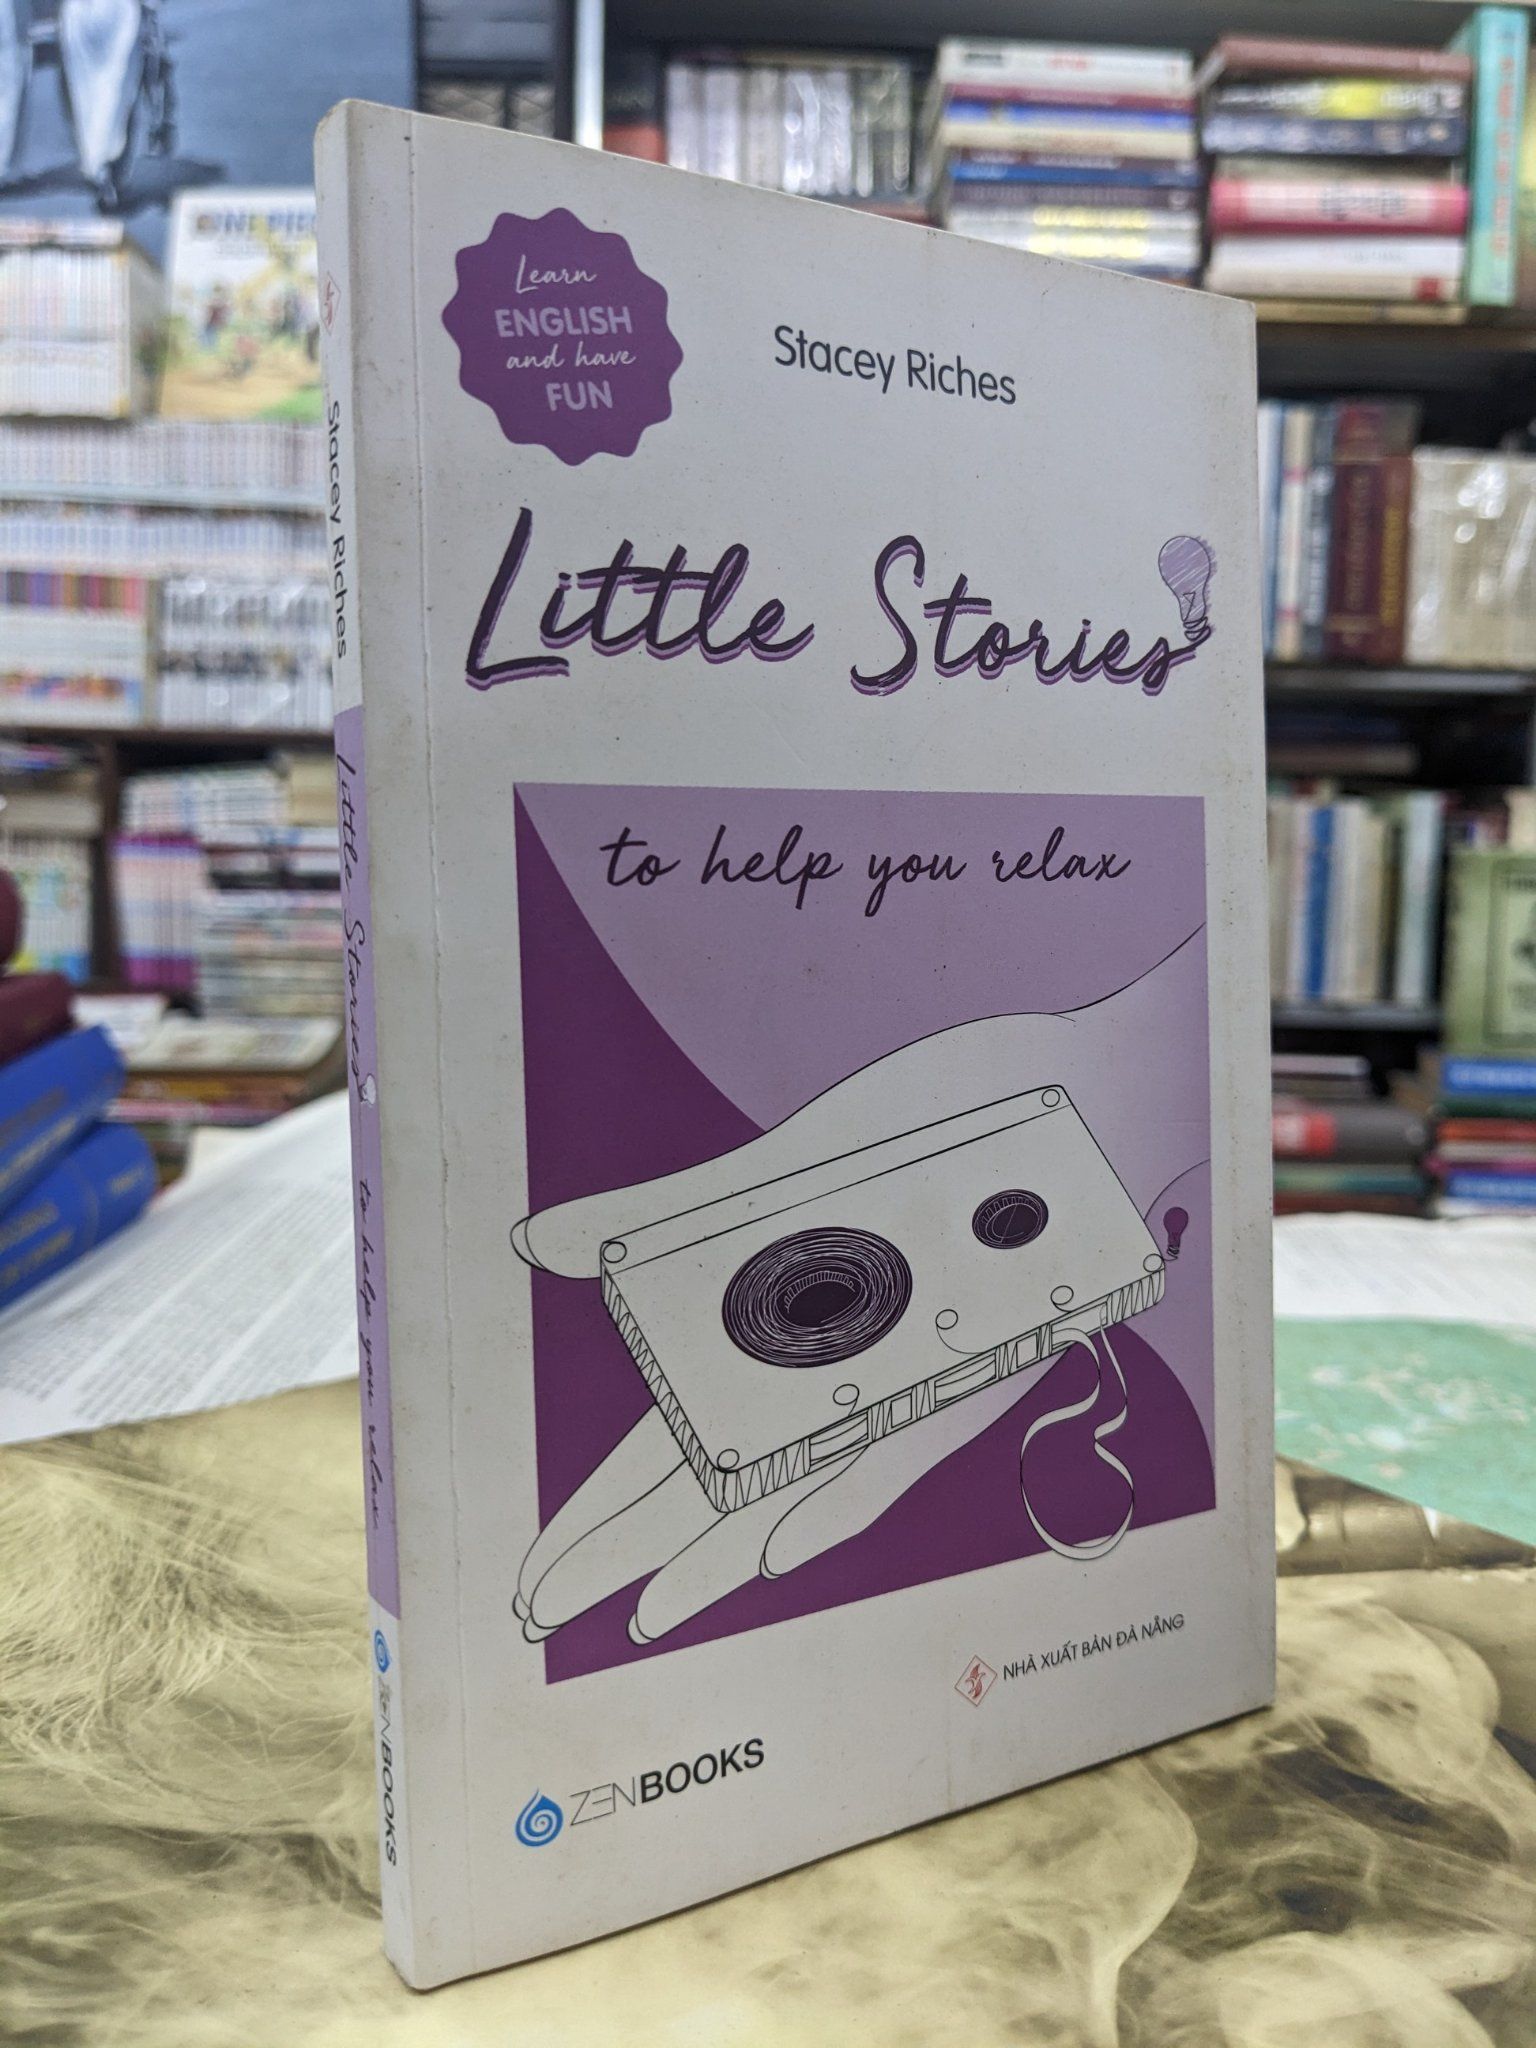  Little Stories to help you relax - Stacey Riches 